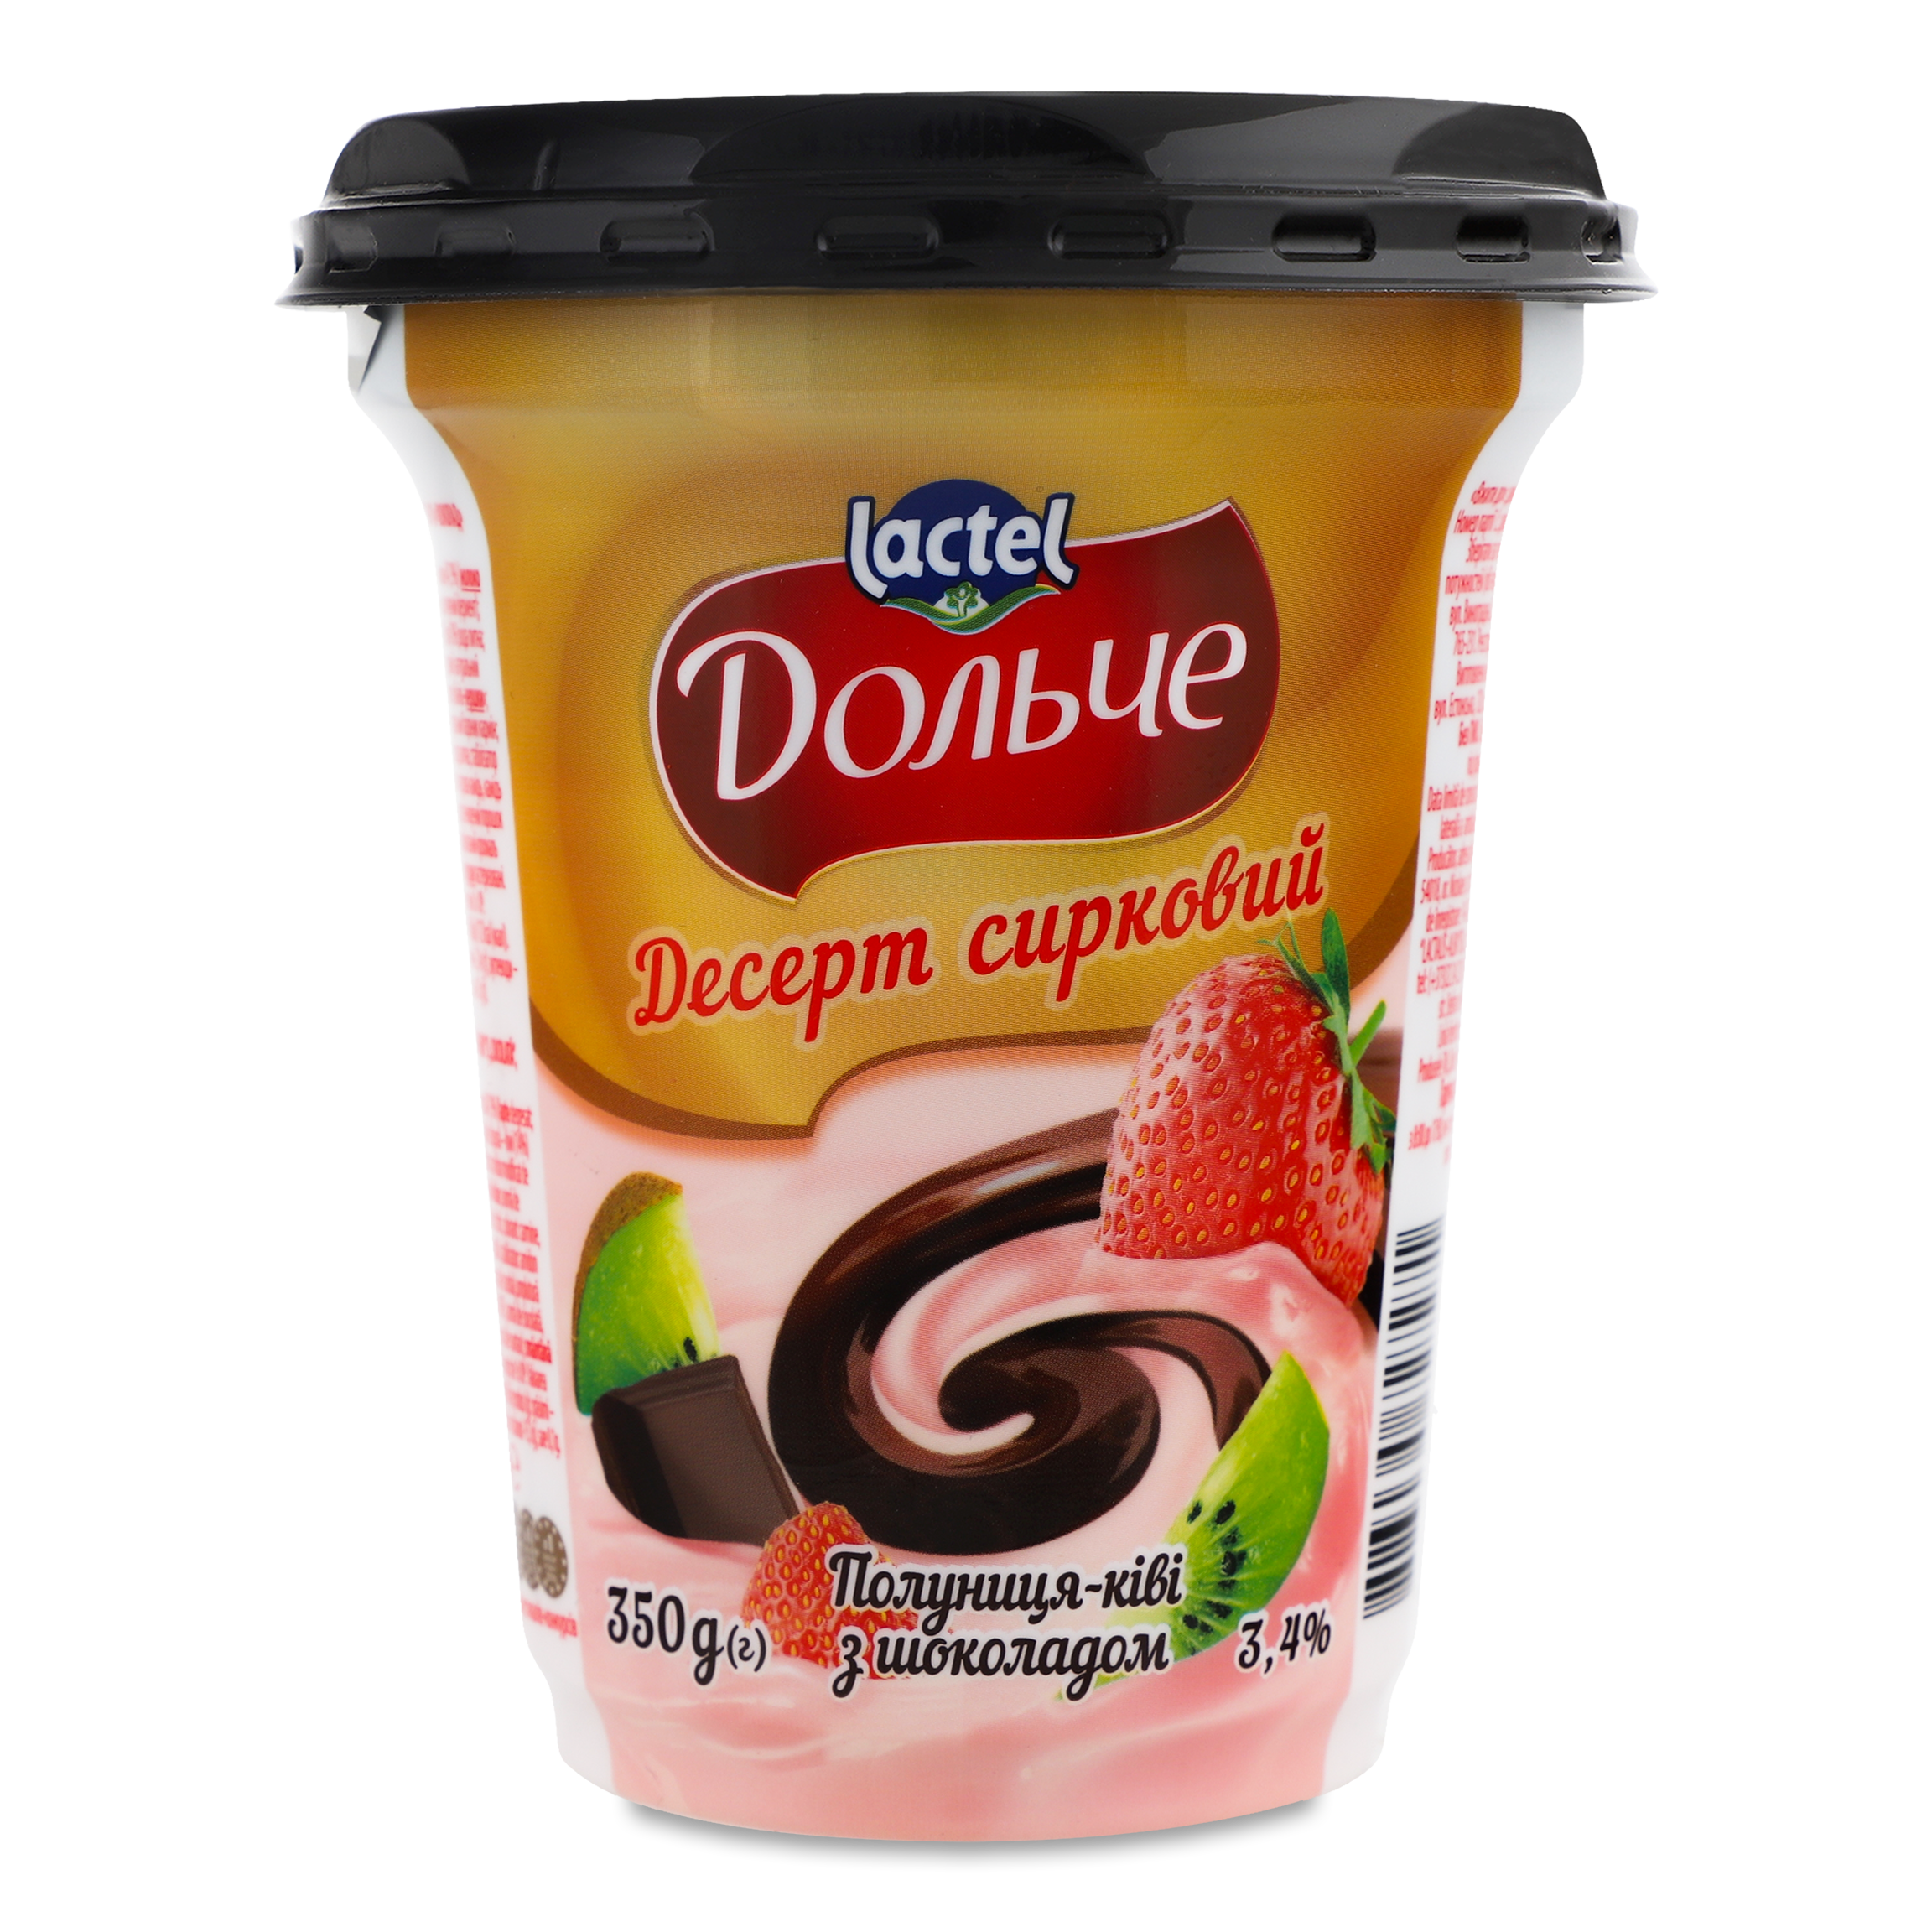 Dolce cheese dessert with fillings of strawberry-kiwa and chocolate 3,4% 350g